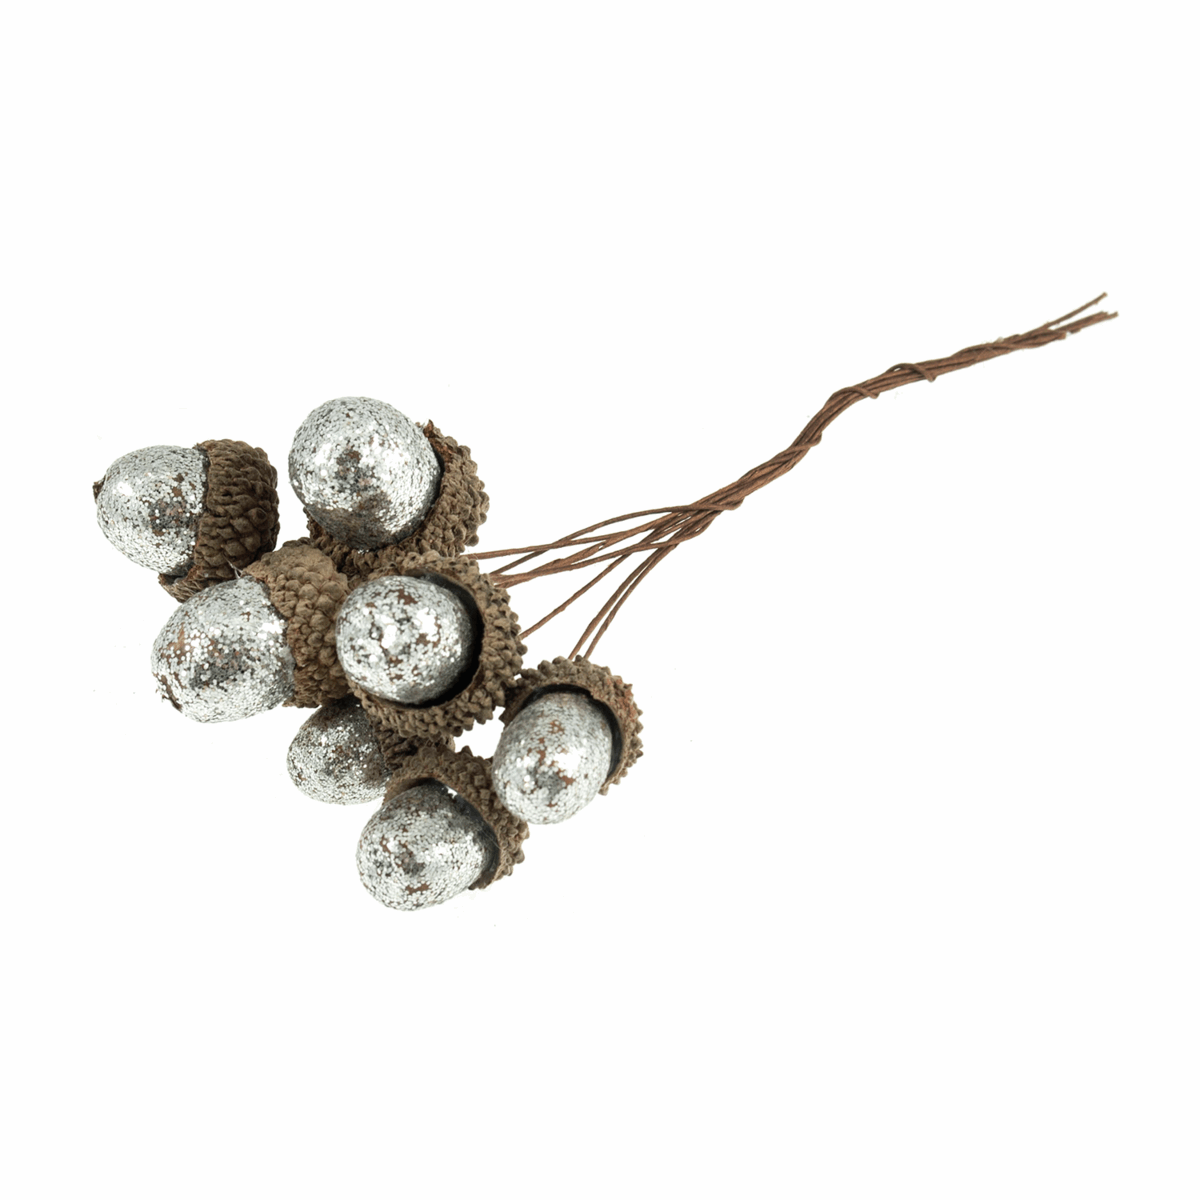 Silver Glitter Acorns on Wire: Bunch of 8